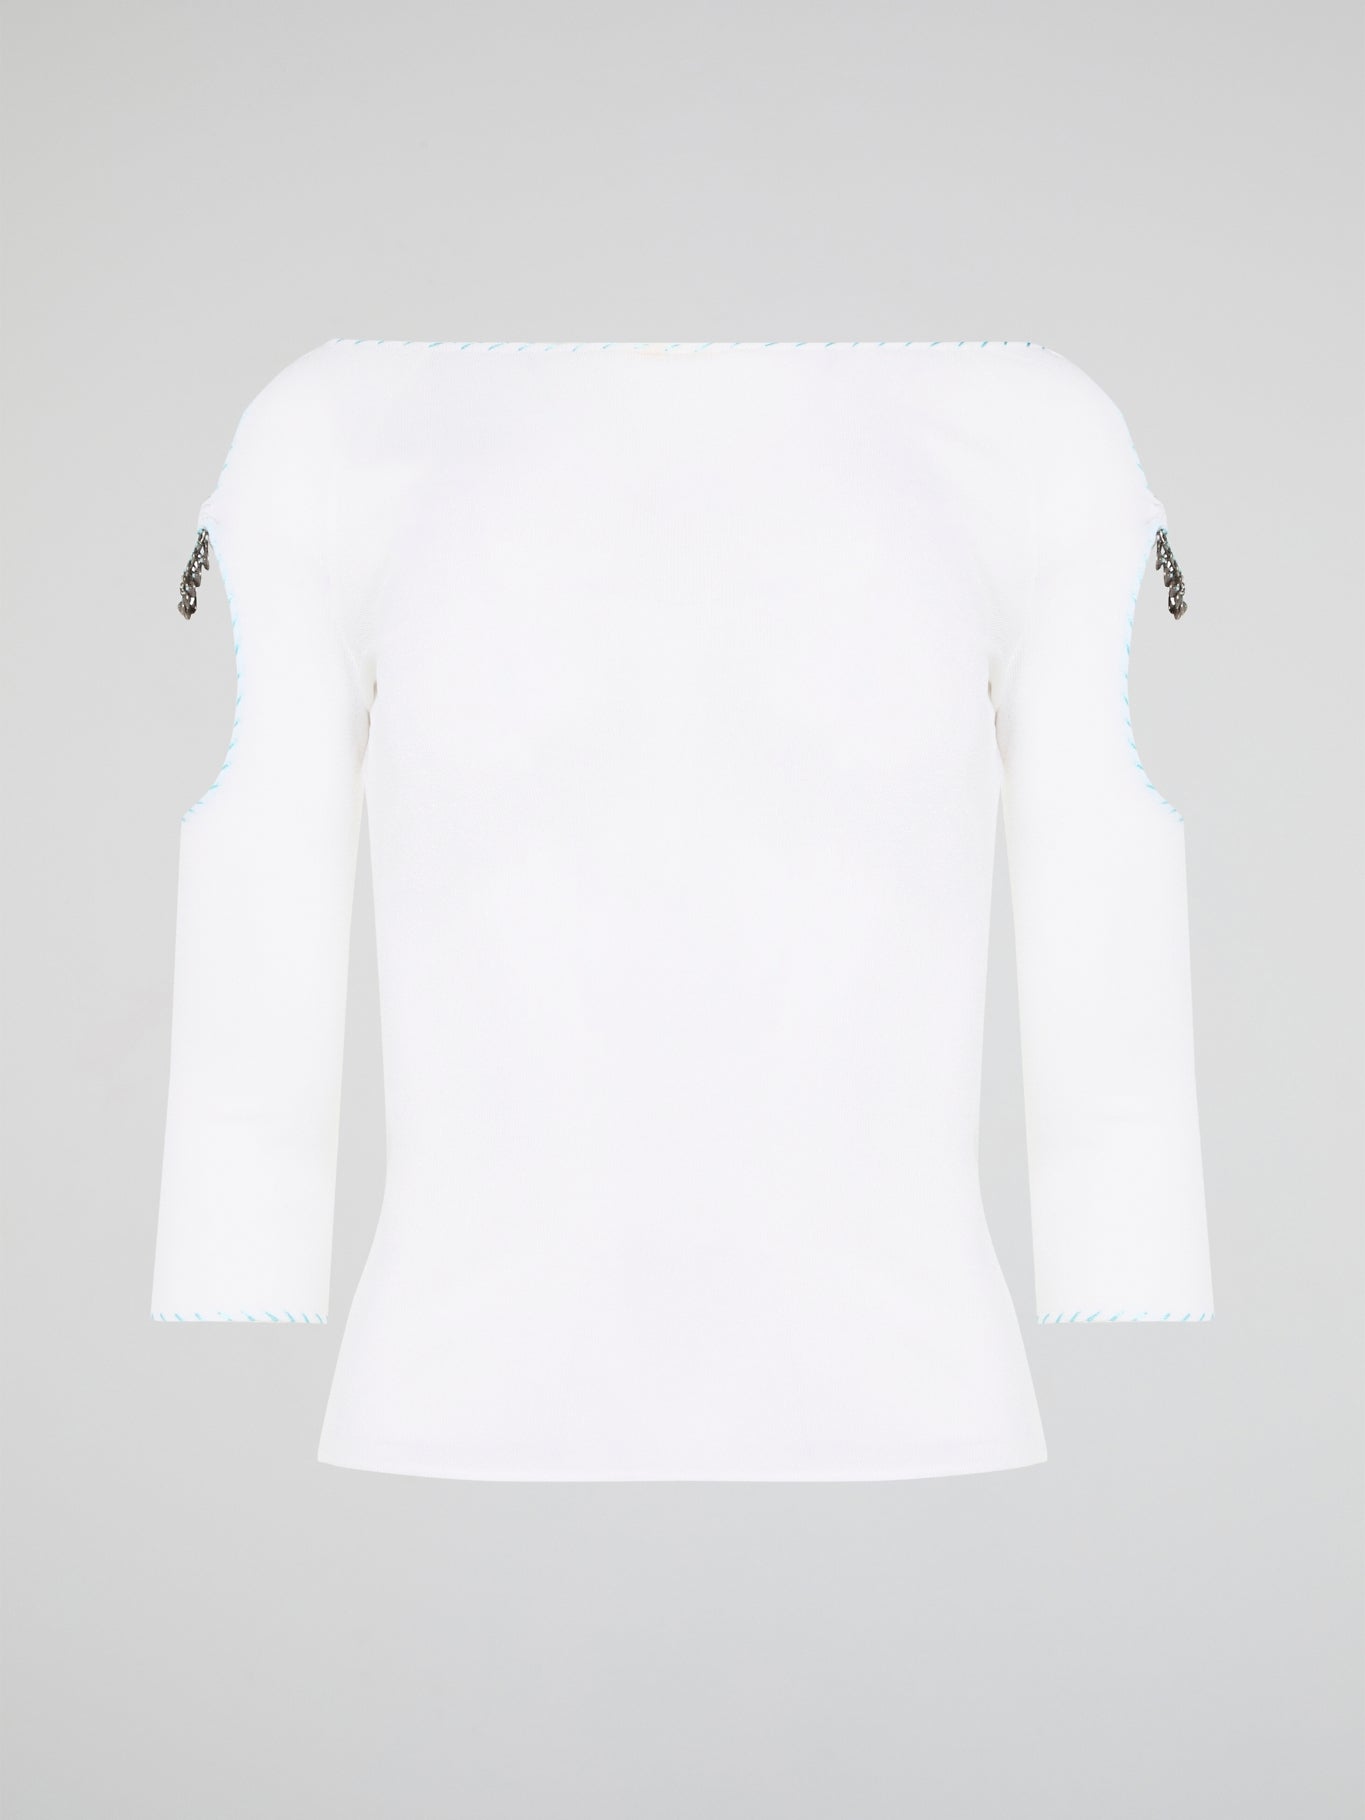 Elevate your everyday wardrobe with this stunning White Cut Out Top from Roberto Cavalli. Crafted from luxurious, high-quality materials, this top features intricate cut out detailing that adds a touch of edge and sophistication to any outfit. Perfect for day or night, this versatile piece is a must-have addition to your fashion collection.